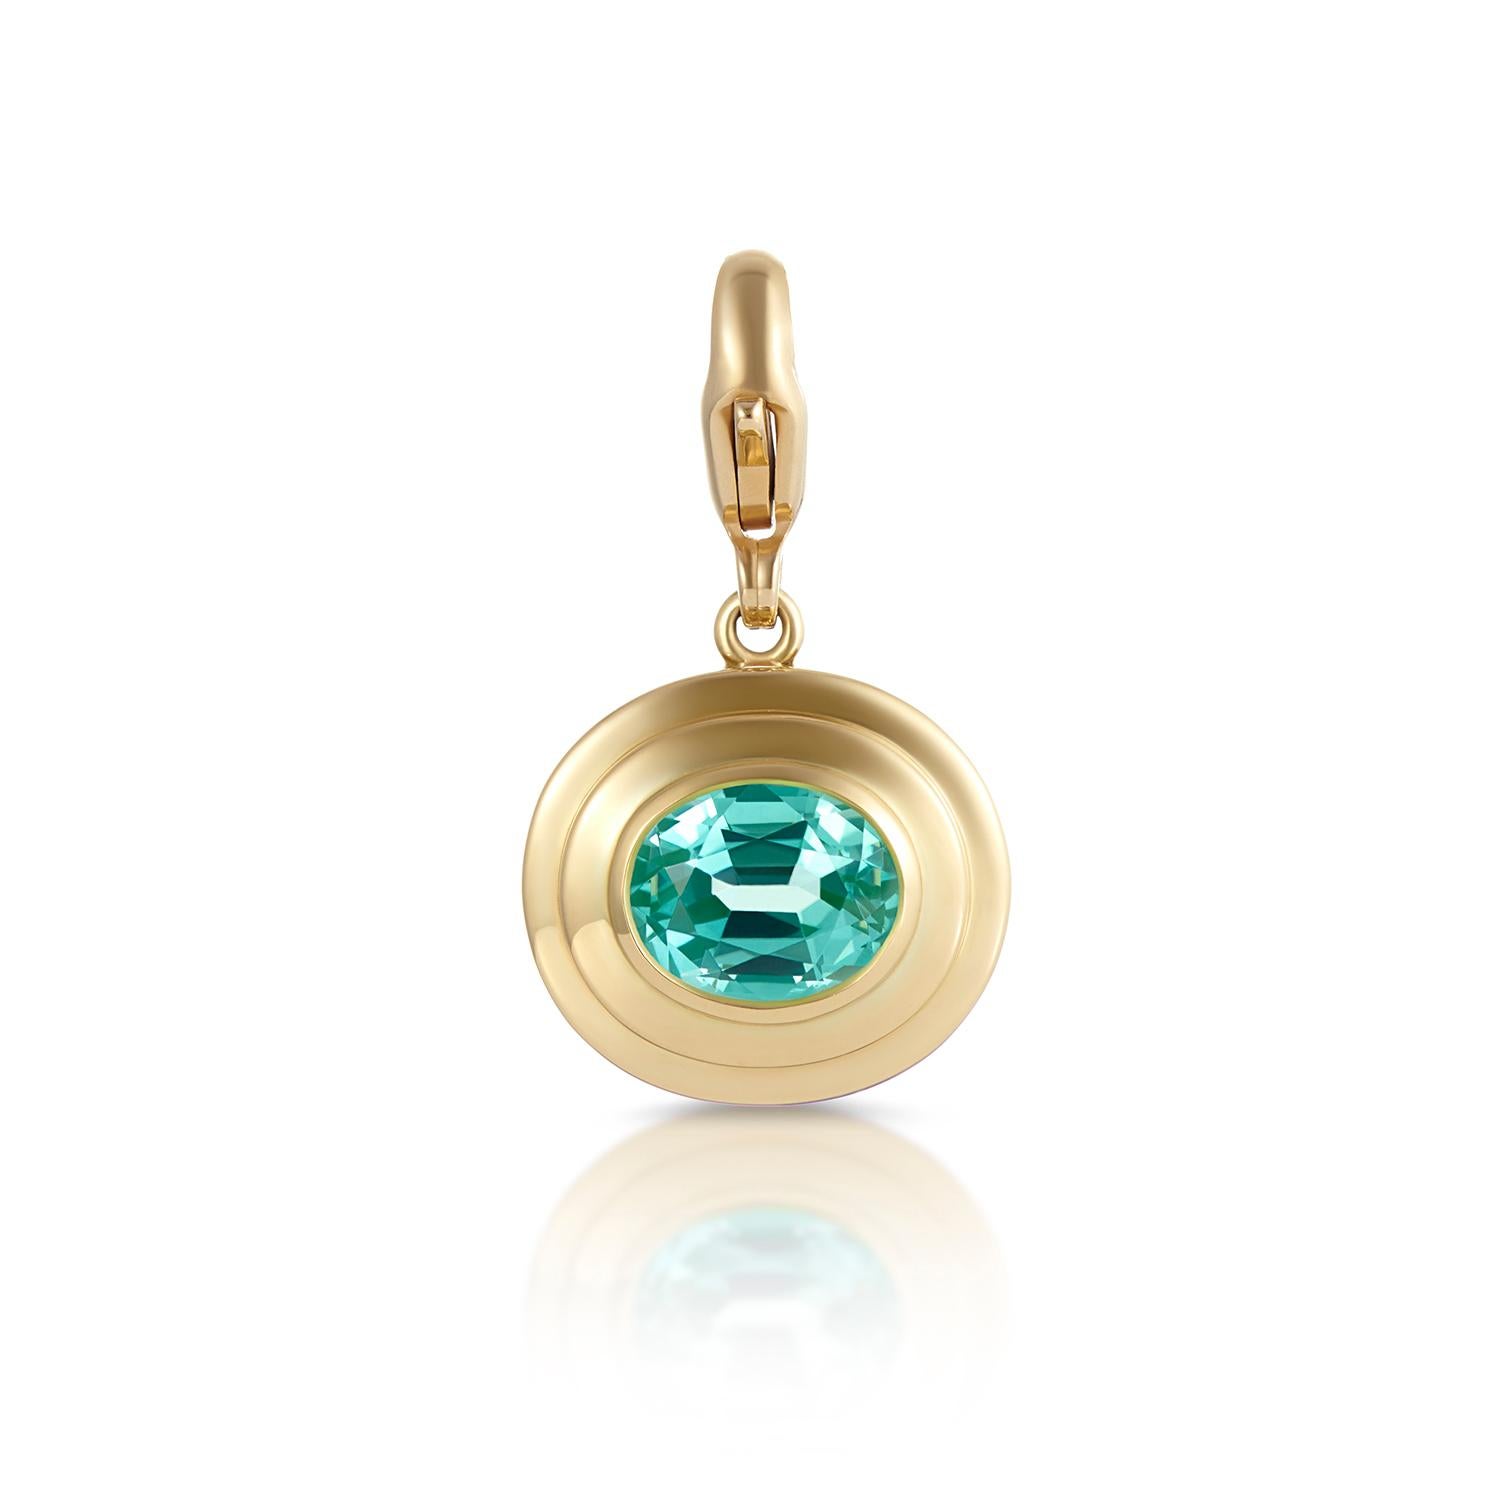 18k Yellow Gold
Lagoon Blue 2.93cts Paraiba Tourmaline 

From the Athena collection, this bold and beautiful necklace takes its inspiration from the sweeping lines of classical Greek architecture.

It is handcrafted in 18k yellow gold and set with